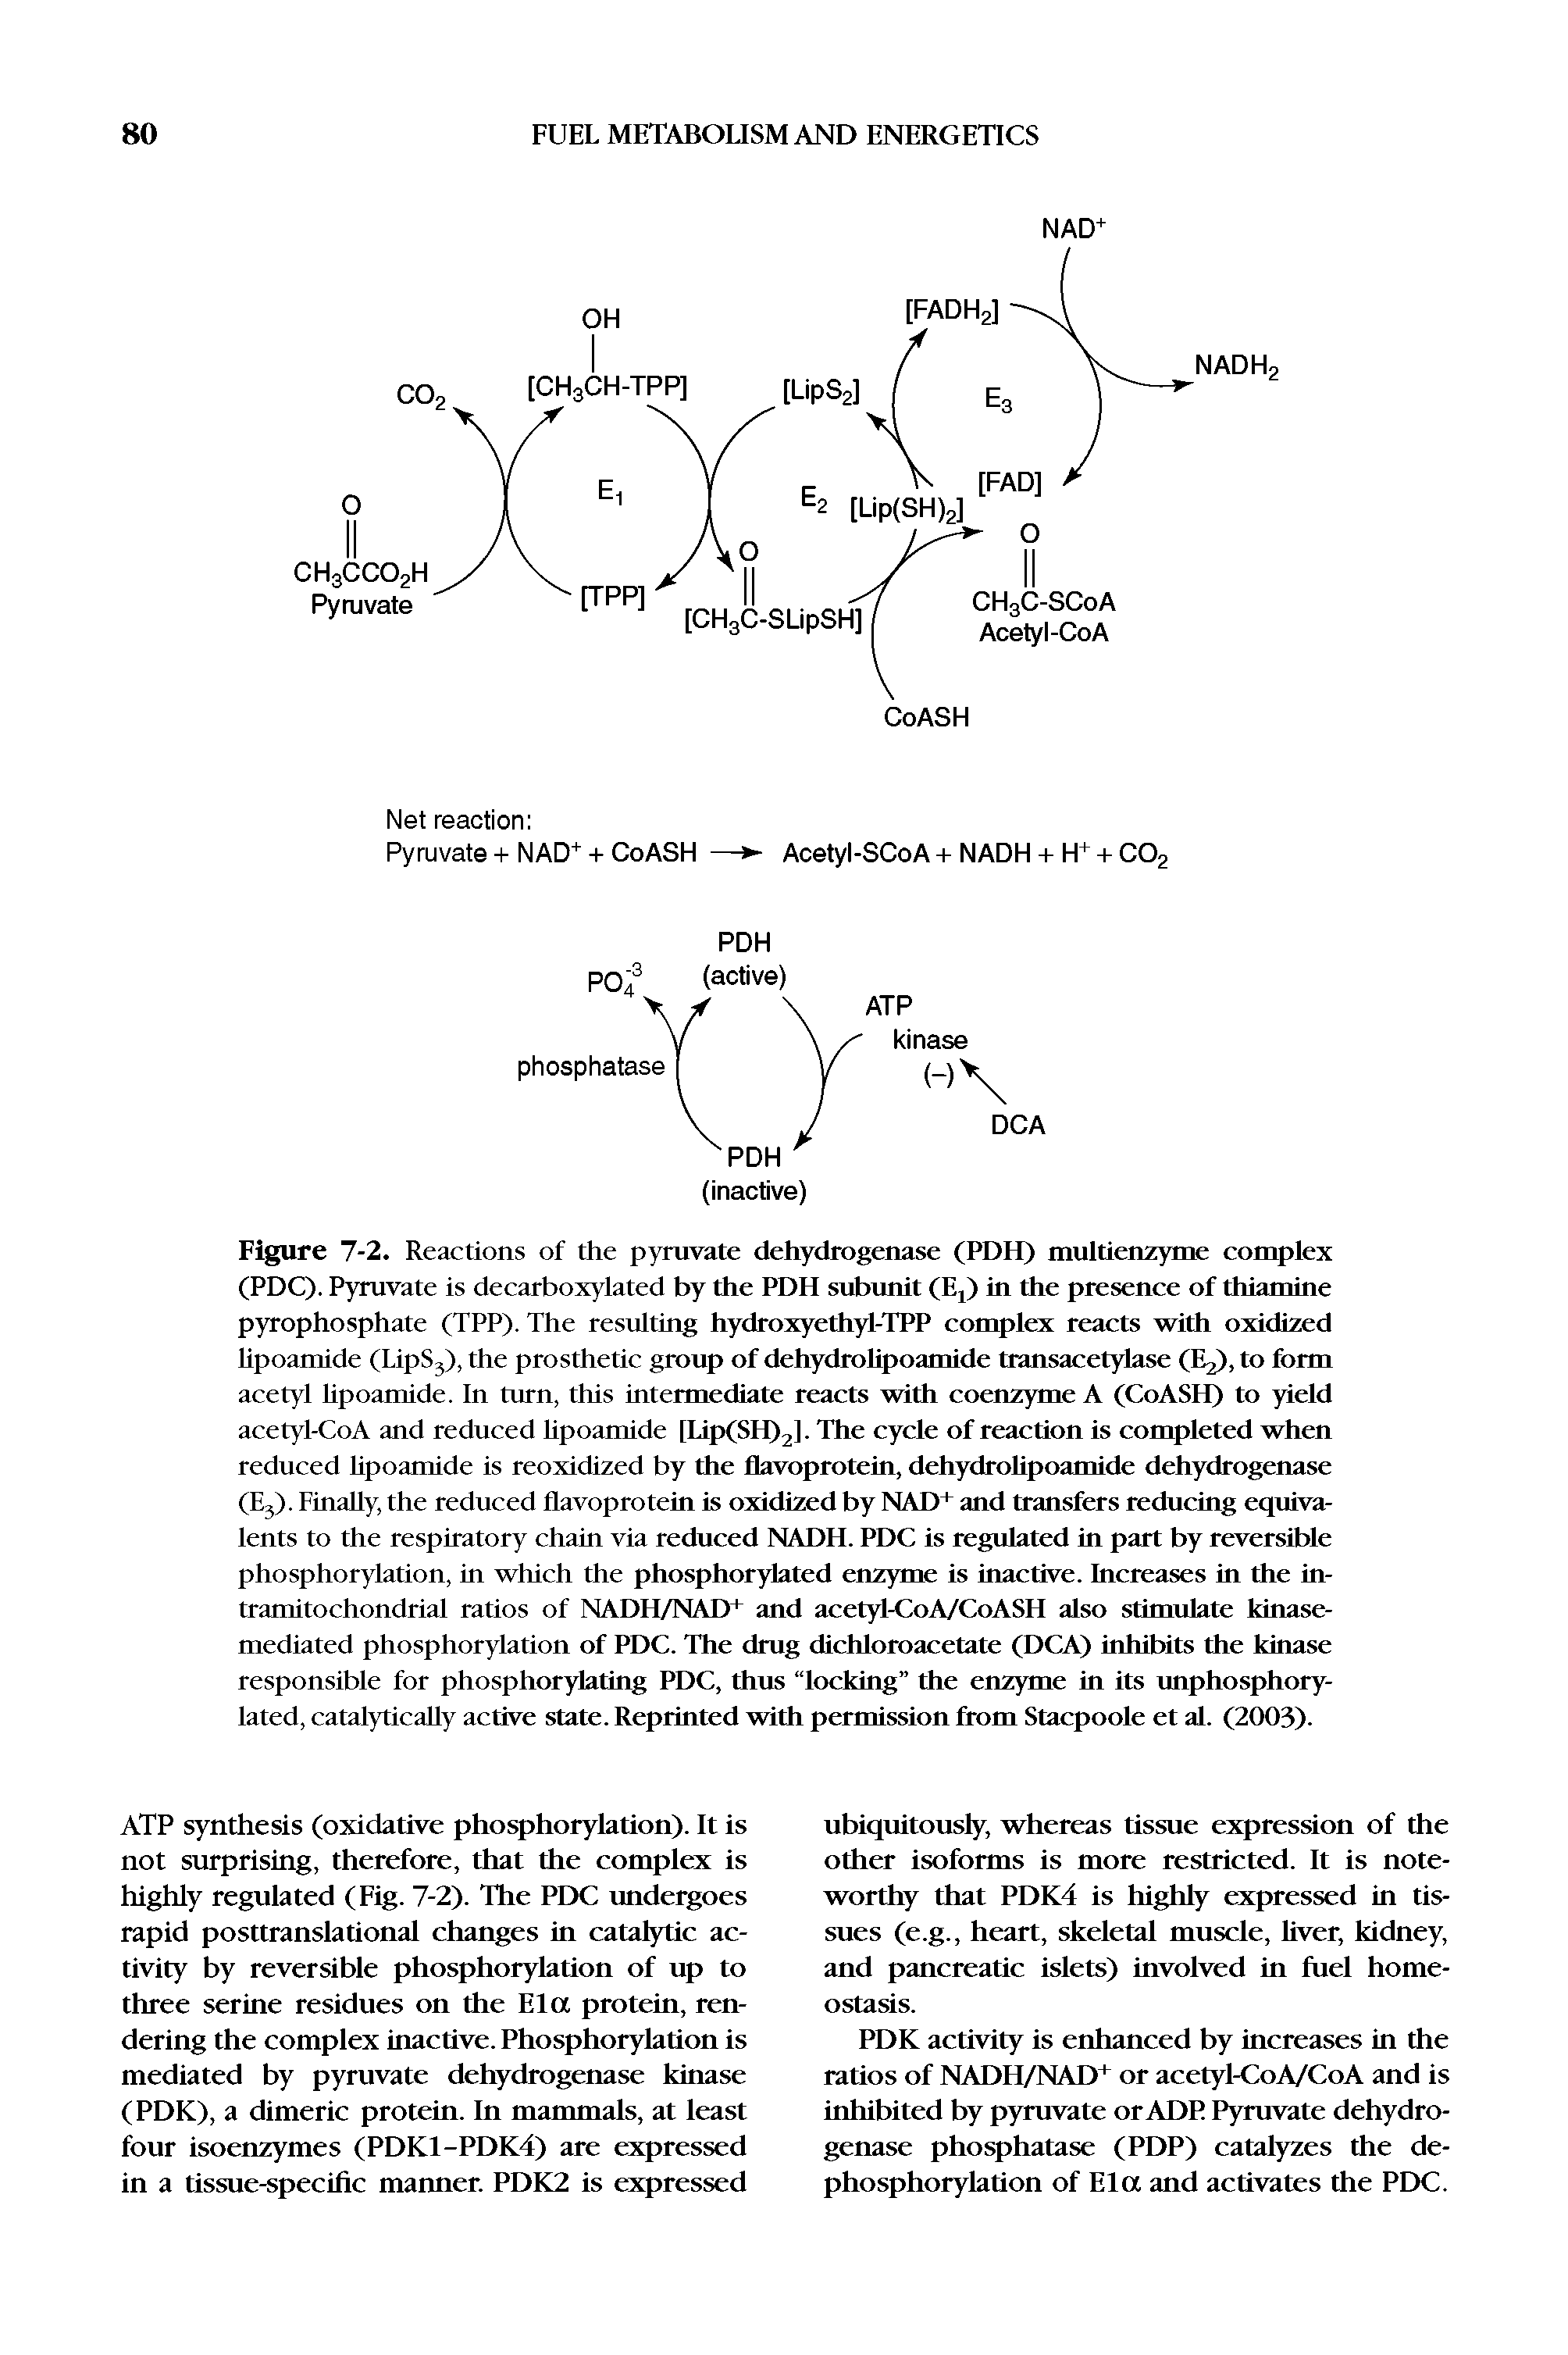 Figure 7-2. Reactions of the pyruvate dehydrogenase (PDU) multienzyme complex (PDC). Pyruvate is decarboxylated by the PDH subunit (I ,) in the presence of thiamine pyrophosphate (TPP). The resulting hydroxyethyl-TPP complex reacts with oxidized lipoamide (LipS3), the prosthetic group of dehydrolipoamide transacetylase (Ii2), to form acetyl lipoamide. In turn, this intermediate reacts with coenzyme A (CoASH) to yield acetyl-CoA and reduced lipoamide [Lip(SH)2]. The cycle of reaction is completed when reduced lipoamide is reoxidized by the flavoprotein, dehydrolipoamide dehydrogenase (E3). Finally, the reduced flavoprotein is oxidized by NAD+ and transfers reducing equivalents to the respiratory chain via reduced NADH. PDC is regulated in part by reversible phosphorylation, in which the phosphorylated enzyme is inactive. Increases in the in-tramitochondrial ratios of NADH/NAD+ and acetyl-CoA/CoASH also stimulate kinase-mediated phosphorylation of PDC. The drug dichloroacetate (DCA) inhibits the kinase responsible for phosphorylating PDC, thus locking the enzyme in its unphosphory-lated, catalytically active state. Reprinted with permission from Stacpoole et al. (2003).